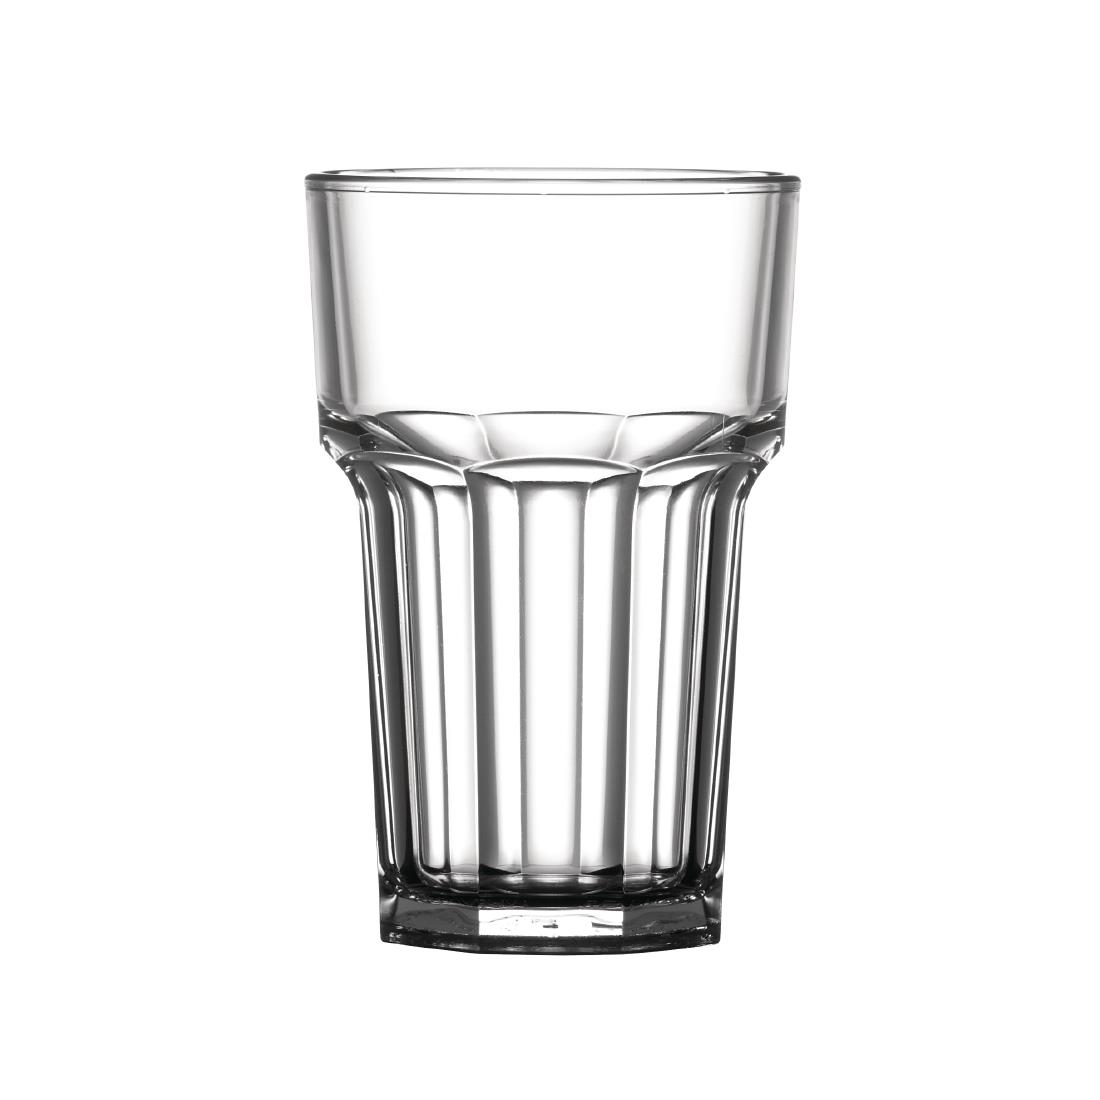 BBP Polycarbonate Nucleated American Hi Ball Glasses Half Pint CE Marked (Pack of 36)